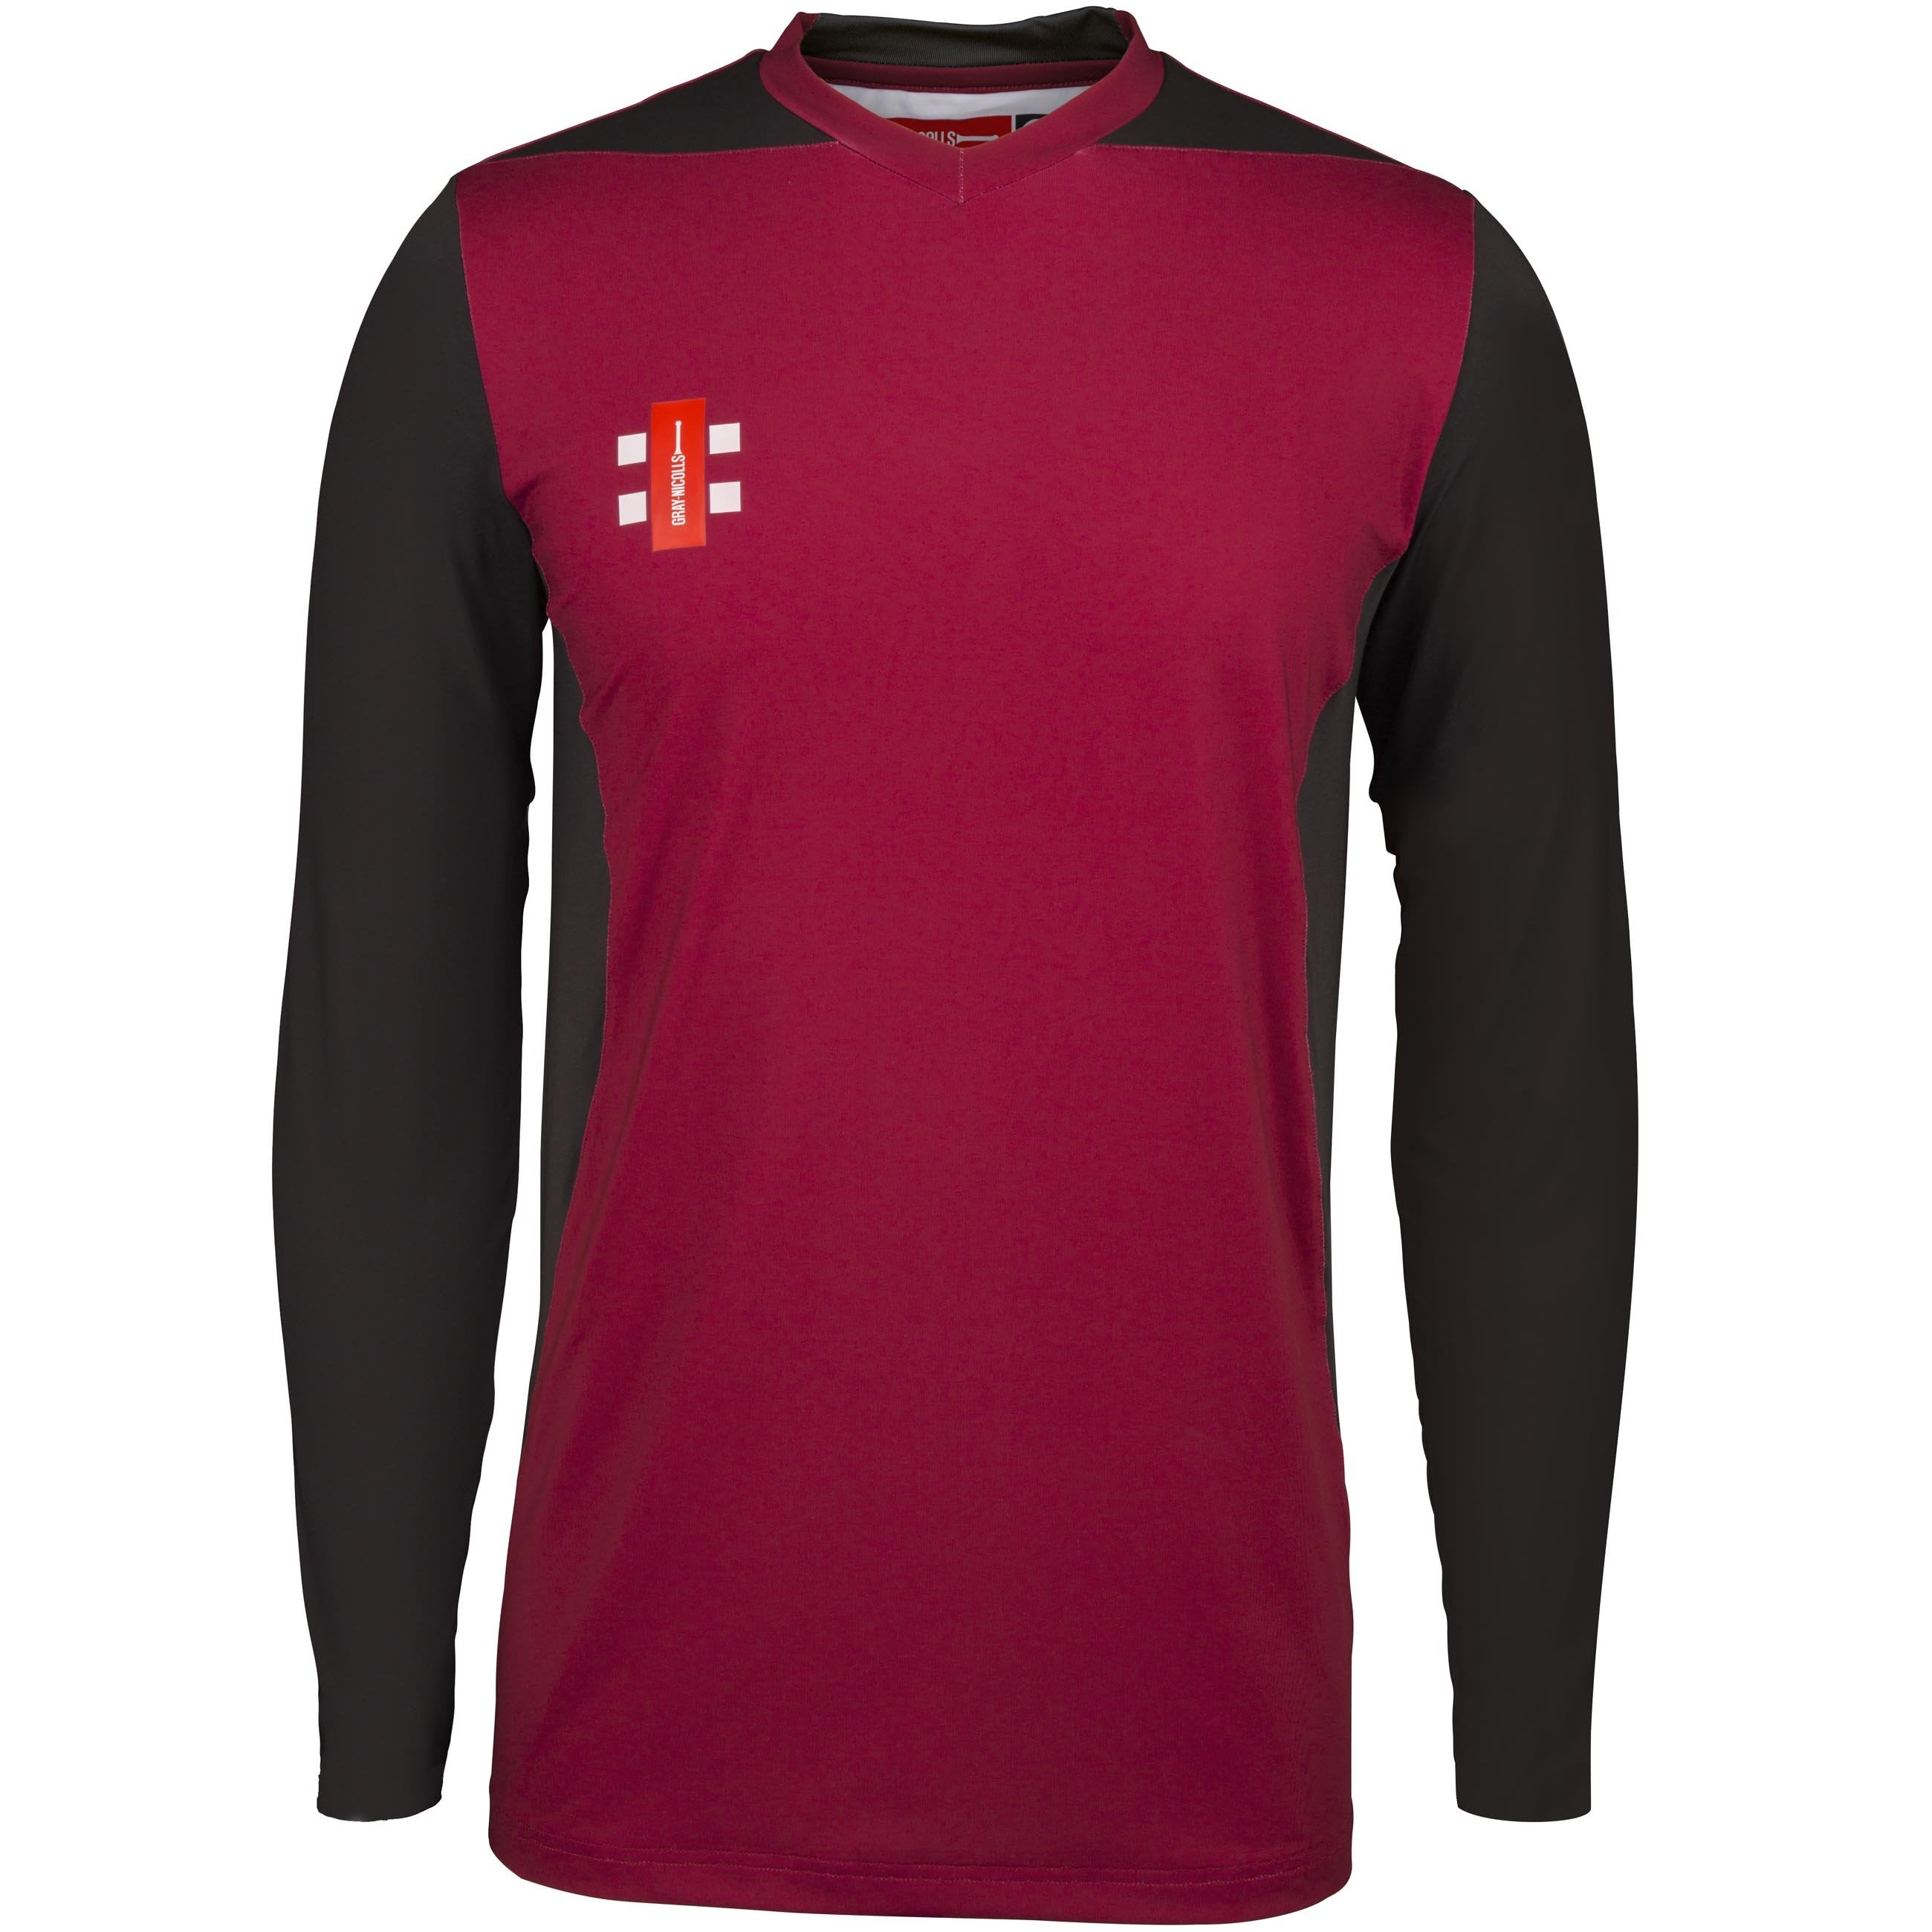 2600 CCFD19 5030805 Shirt T20 Long Sleeve Maroon & Black, Front